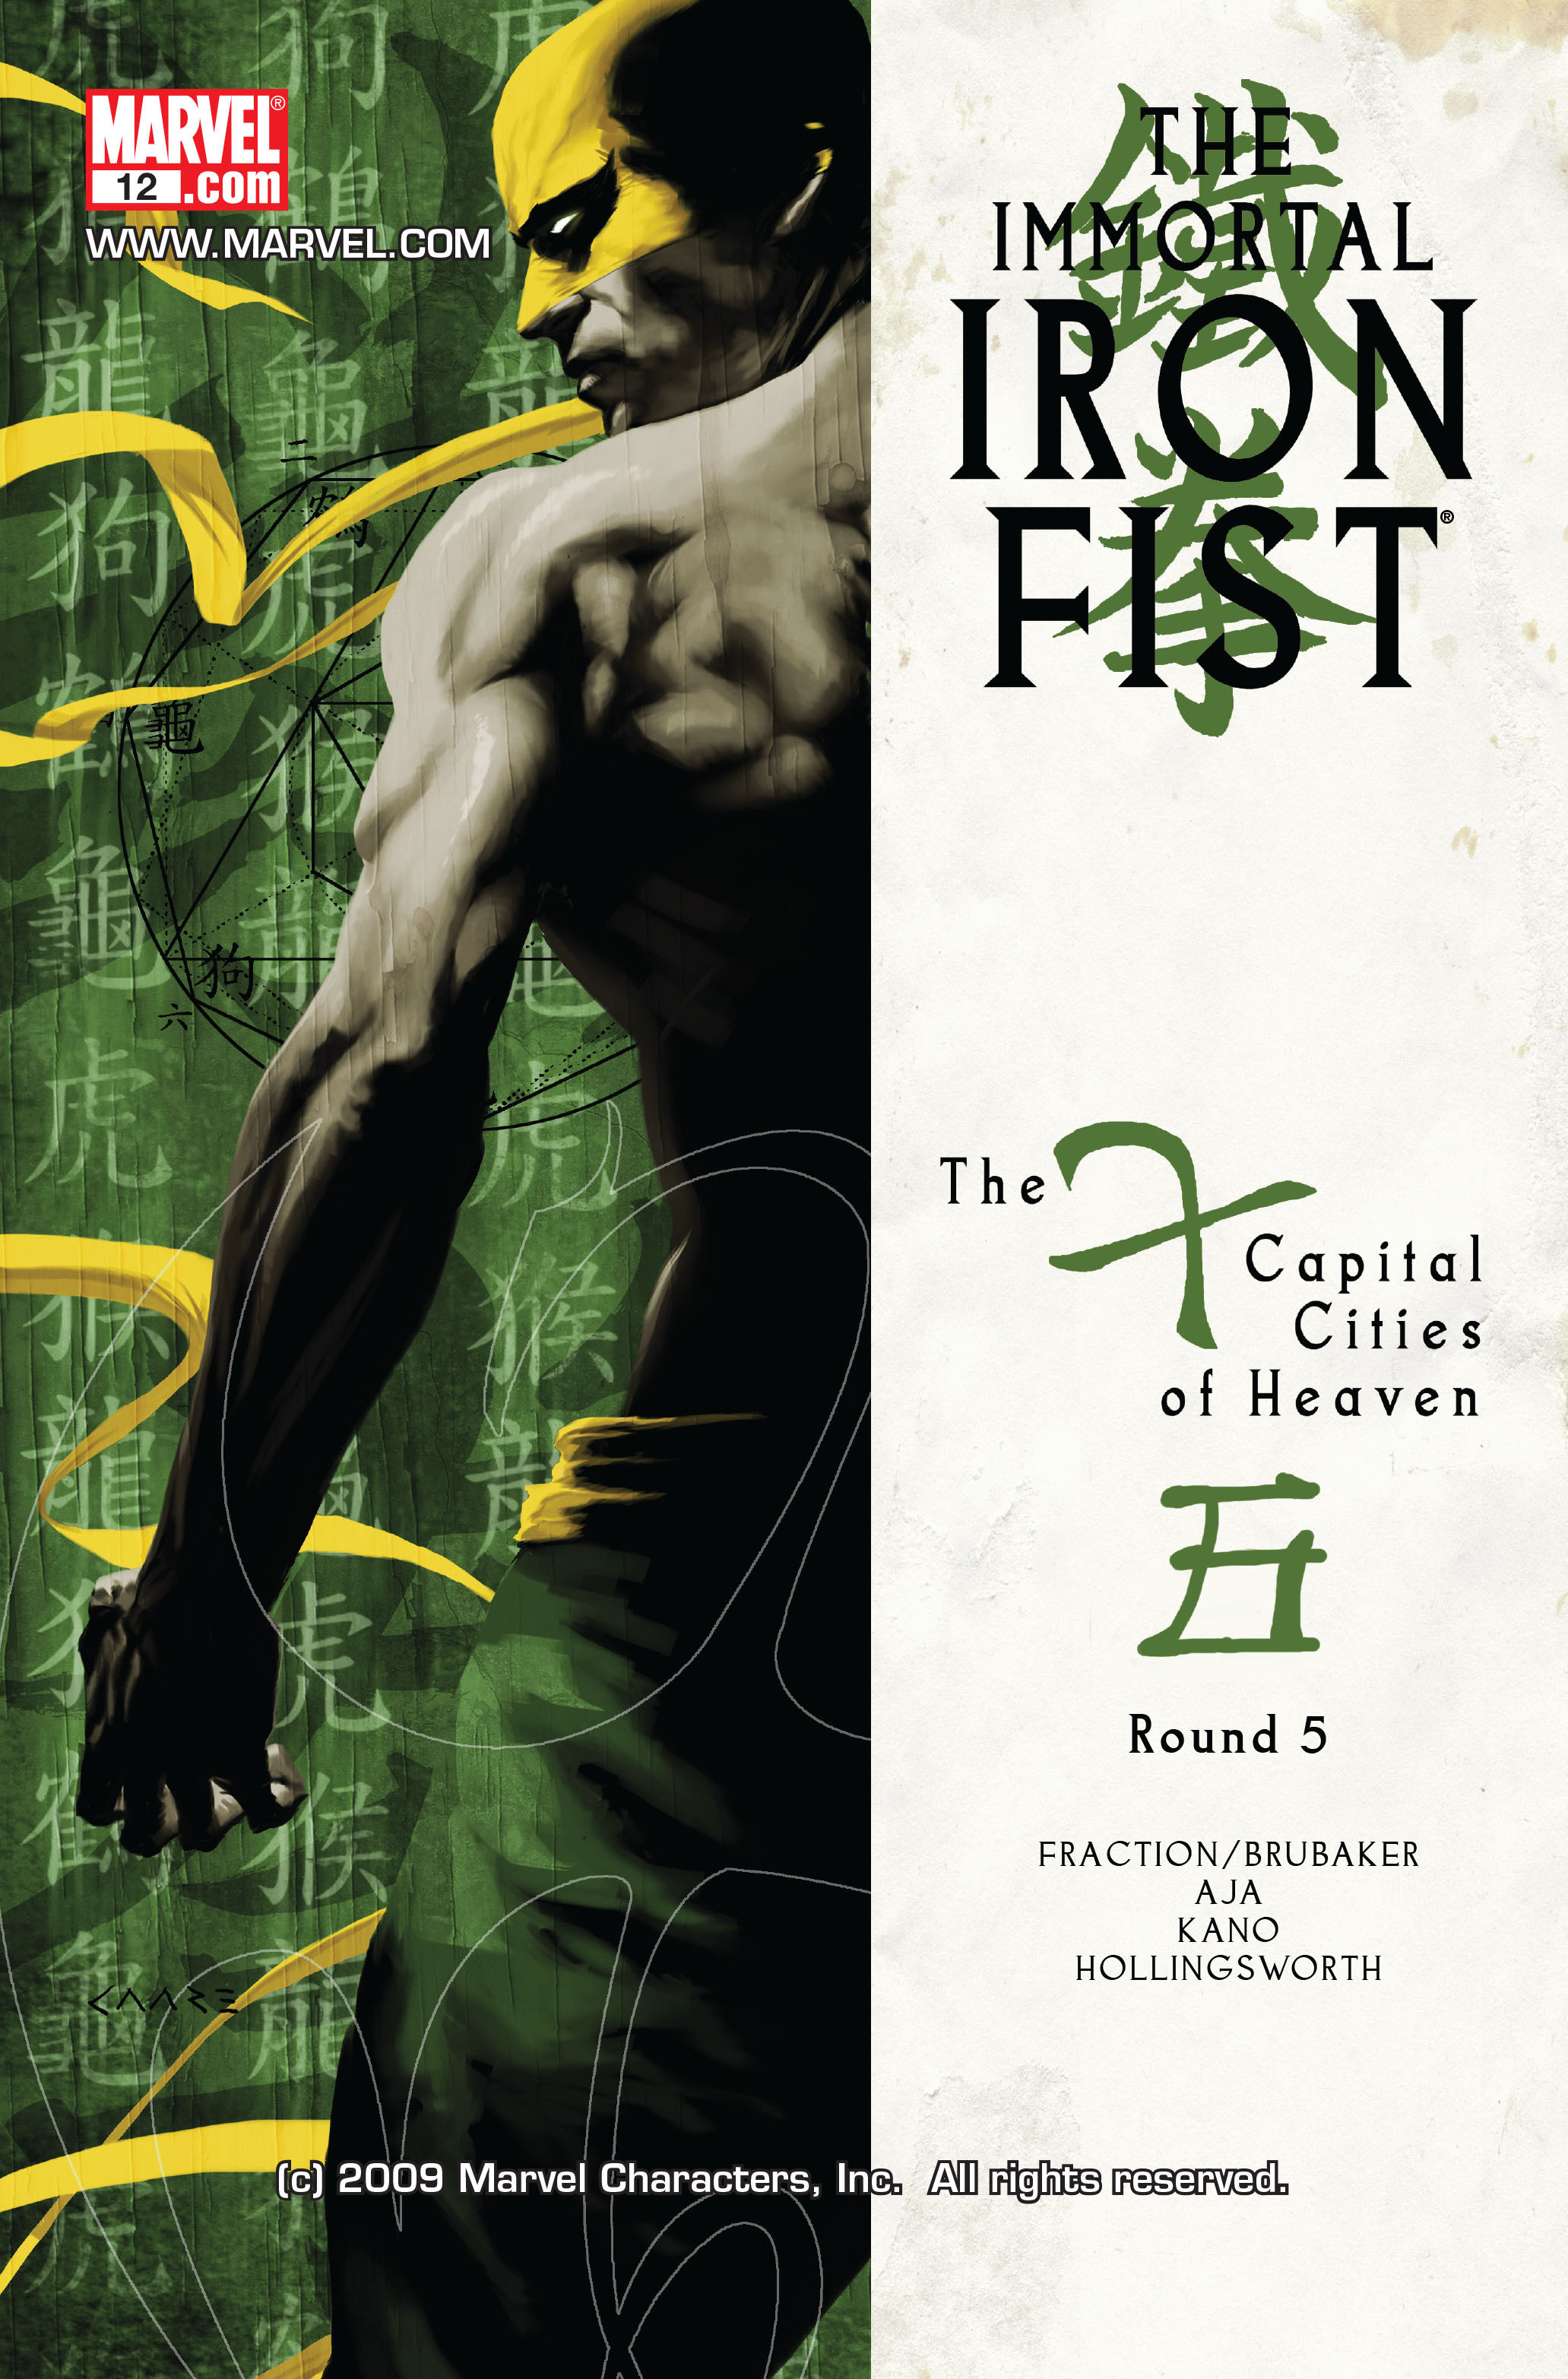 Crítica: Iron Fist 1x06: Immortal Emerges From Cave